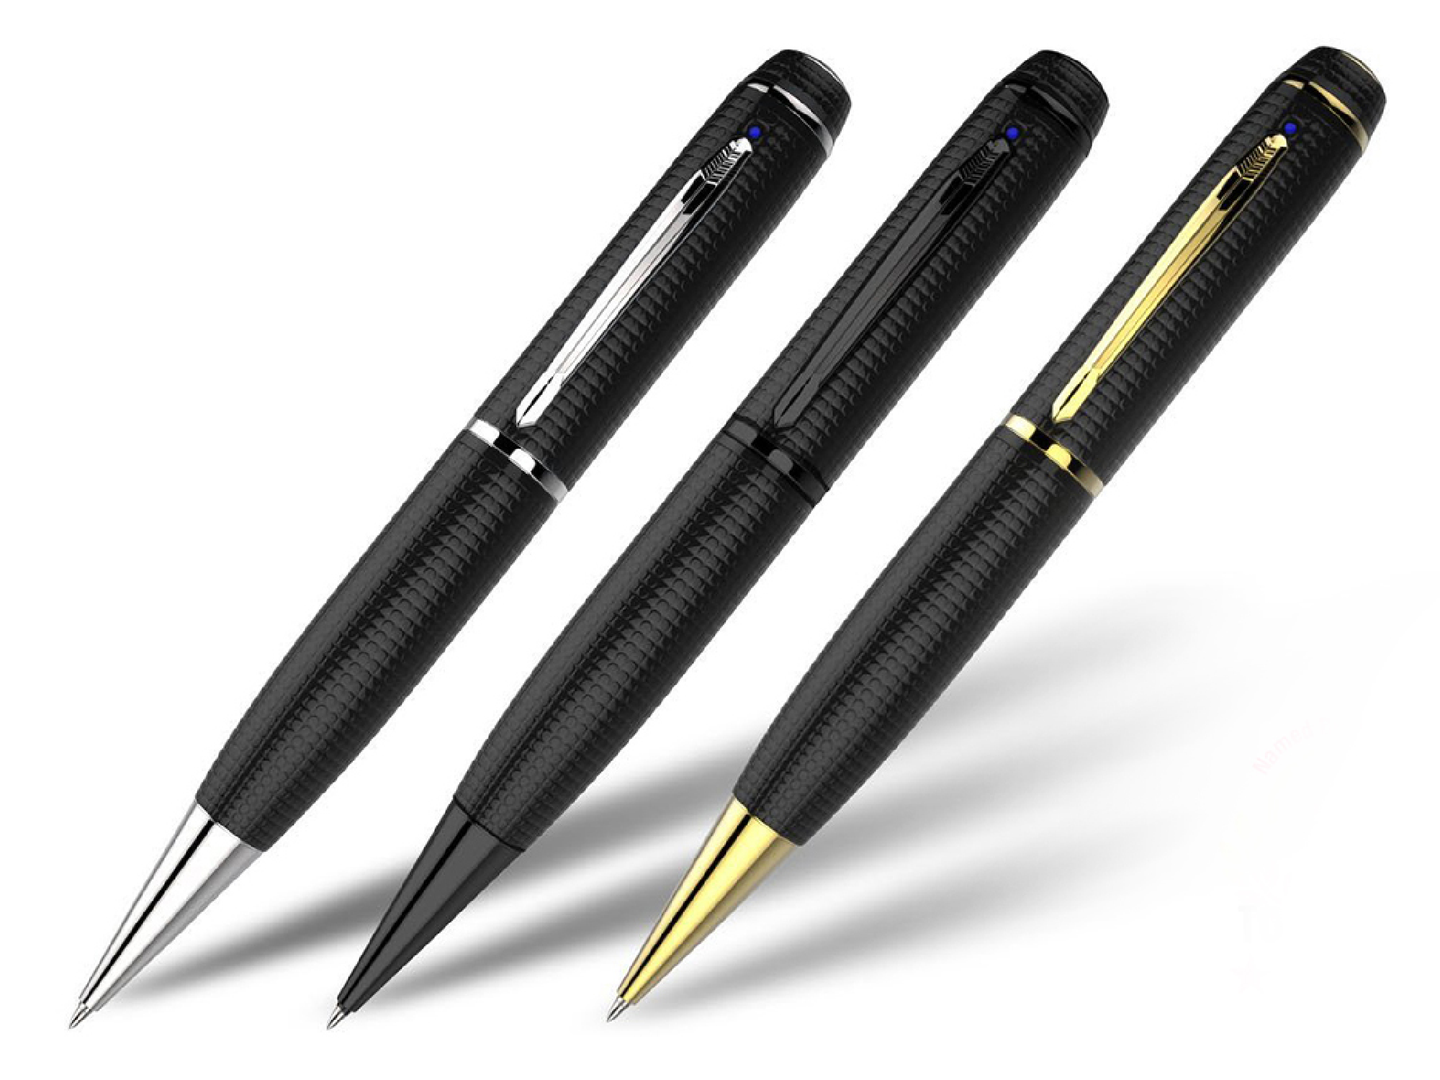 Three pens with a hidden camera on a plain background.